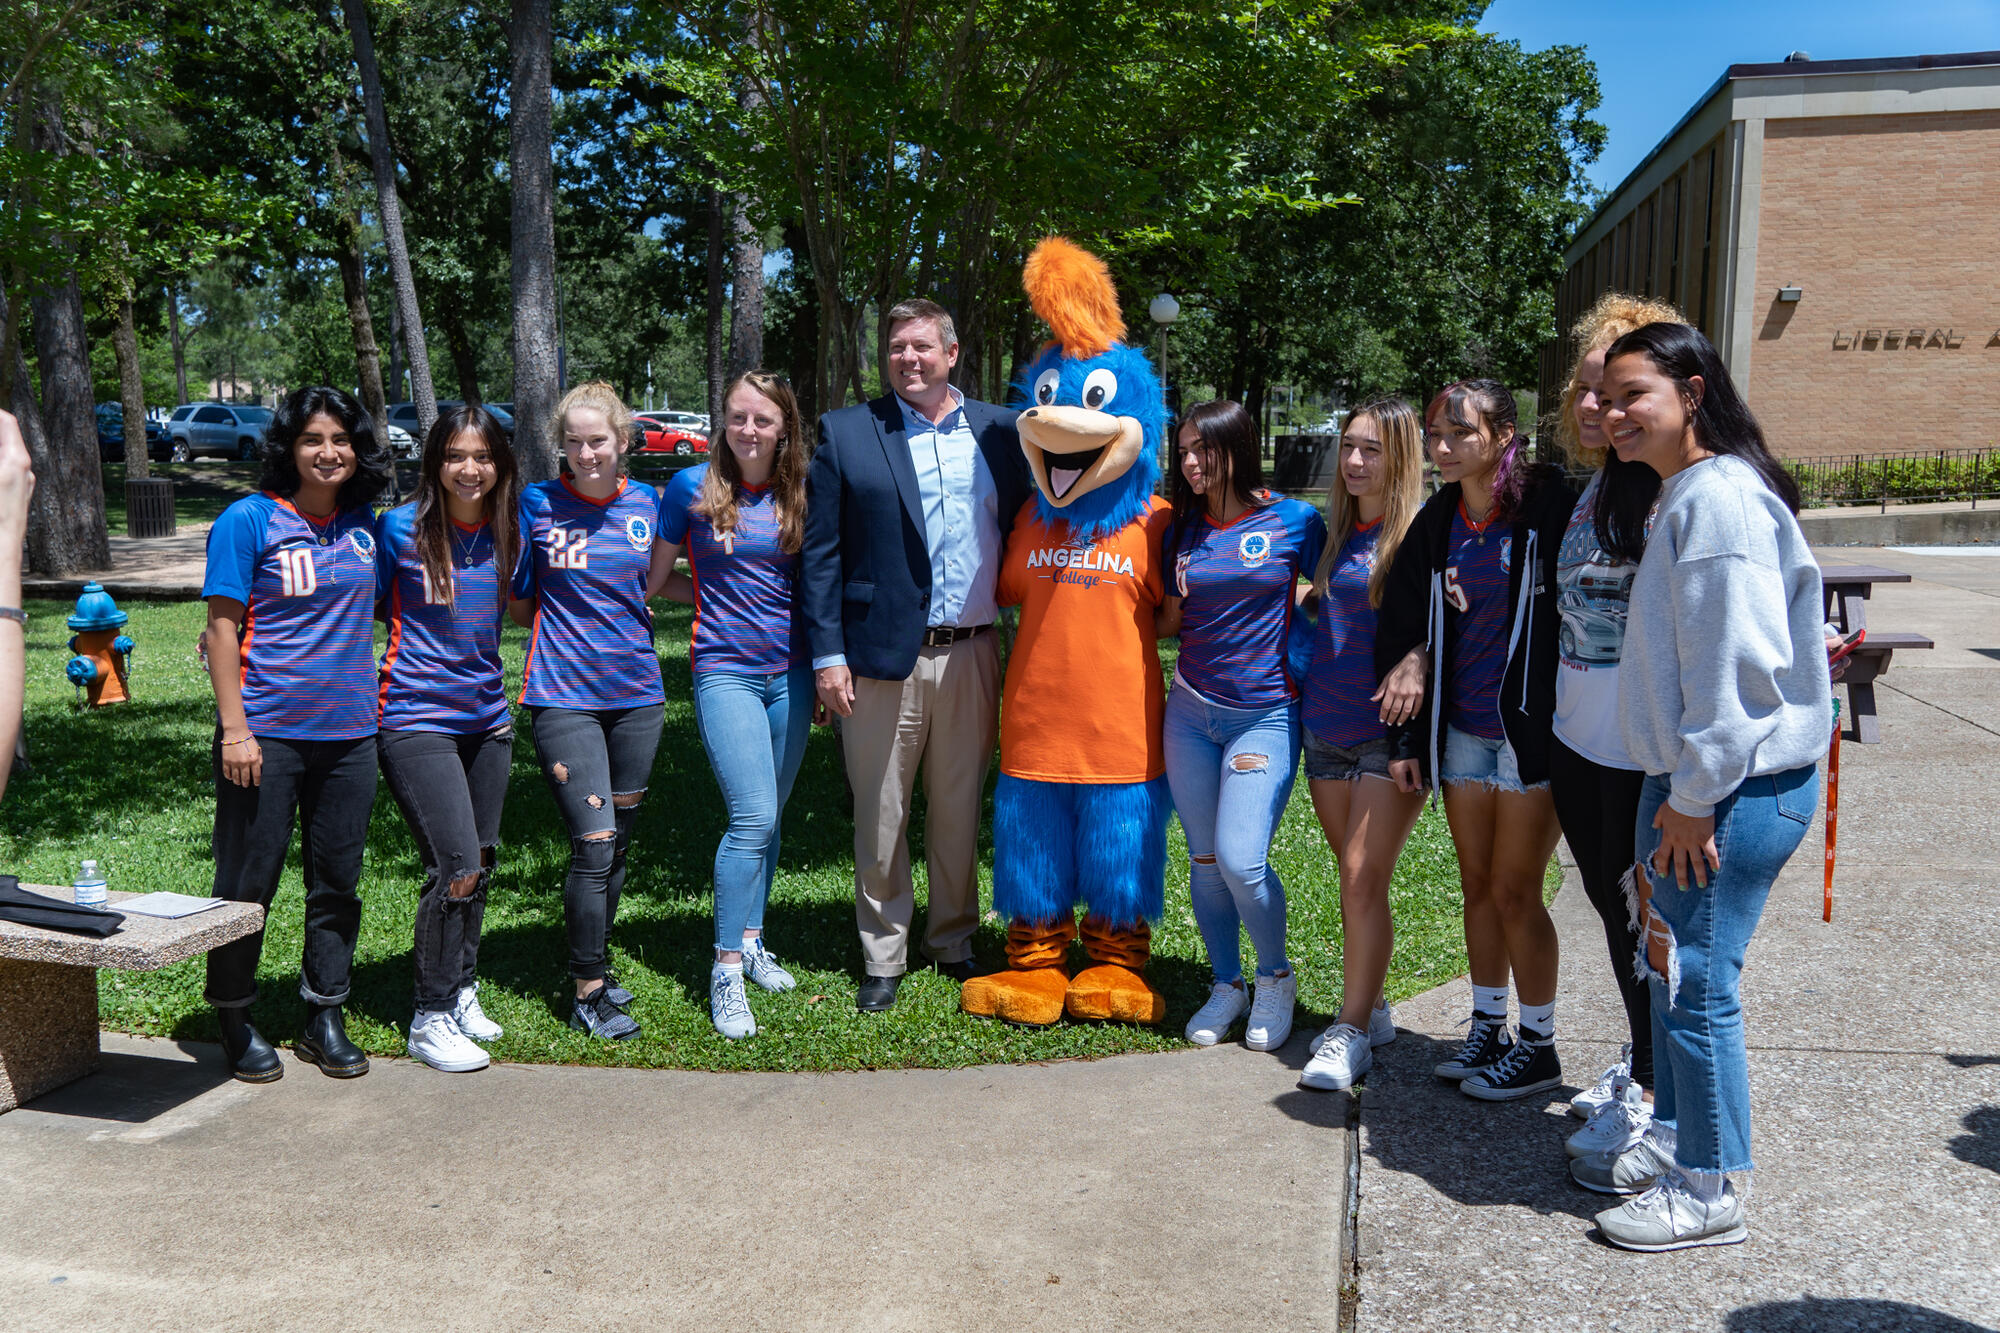 Student Group Photo with Mascot